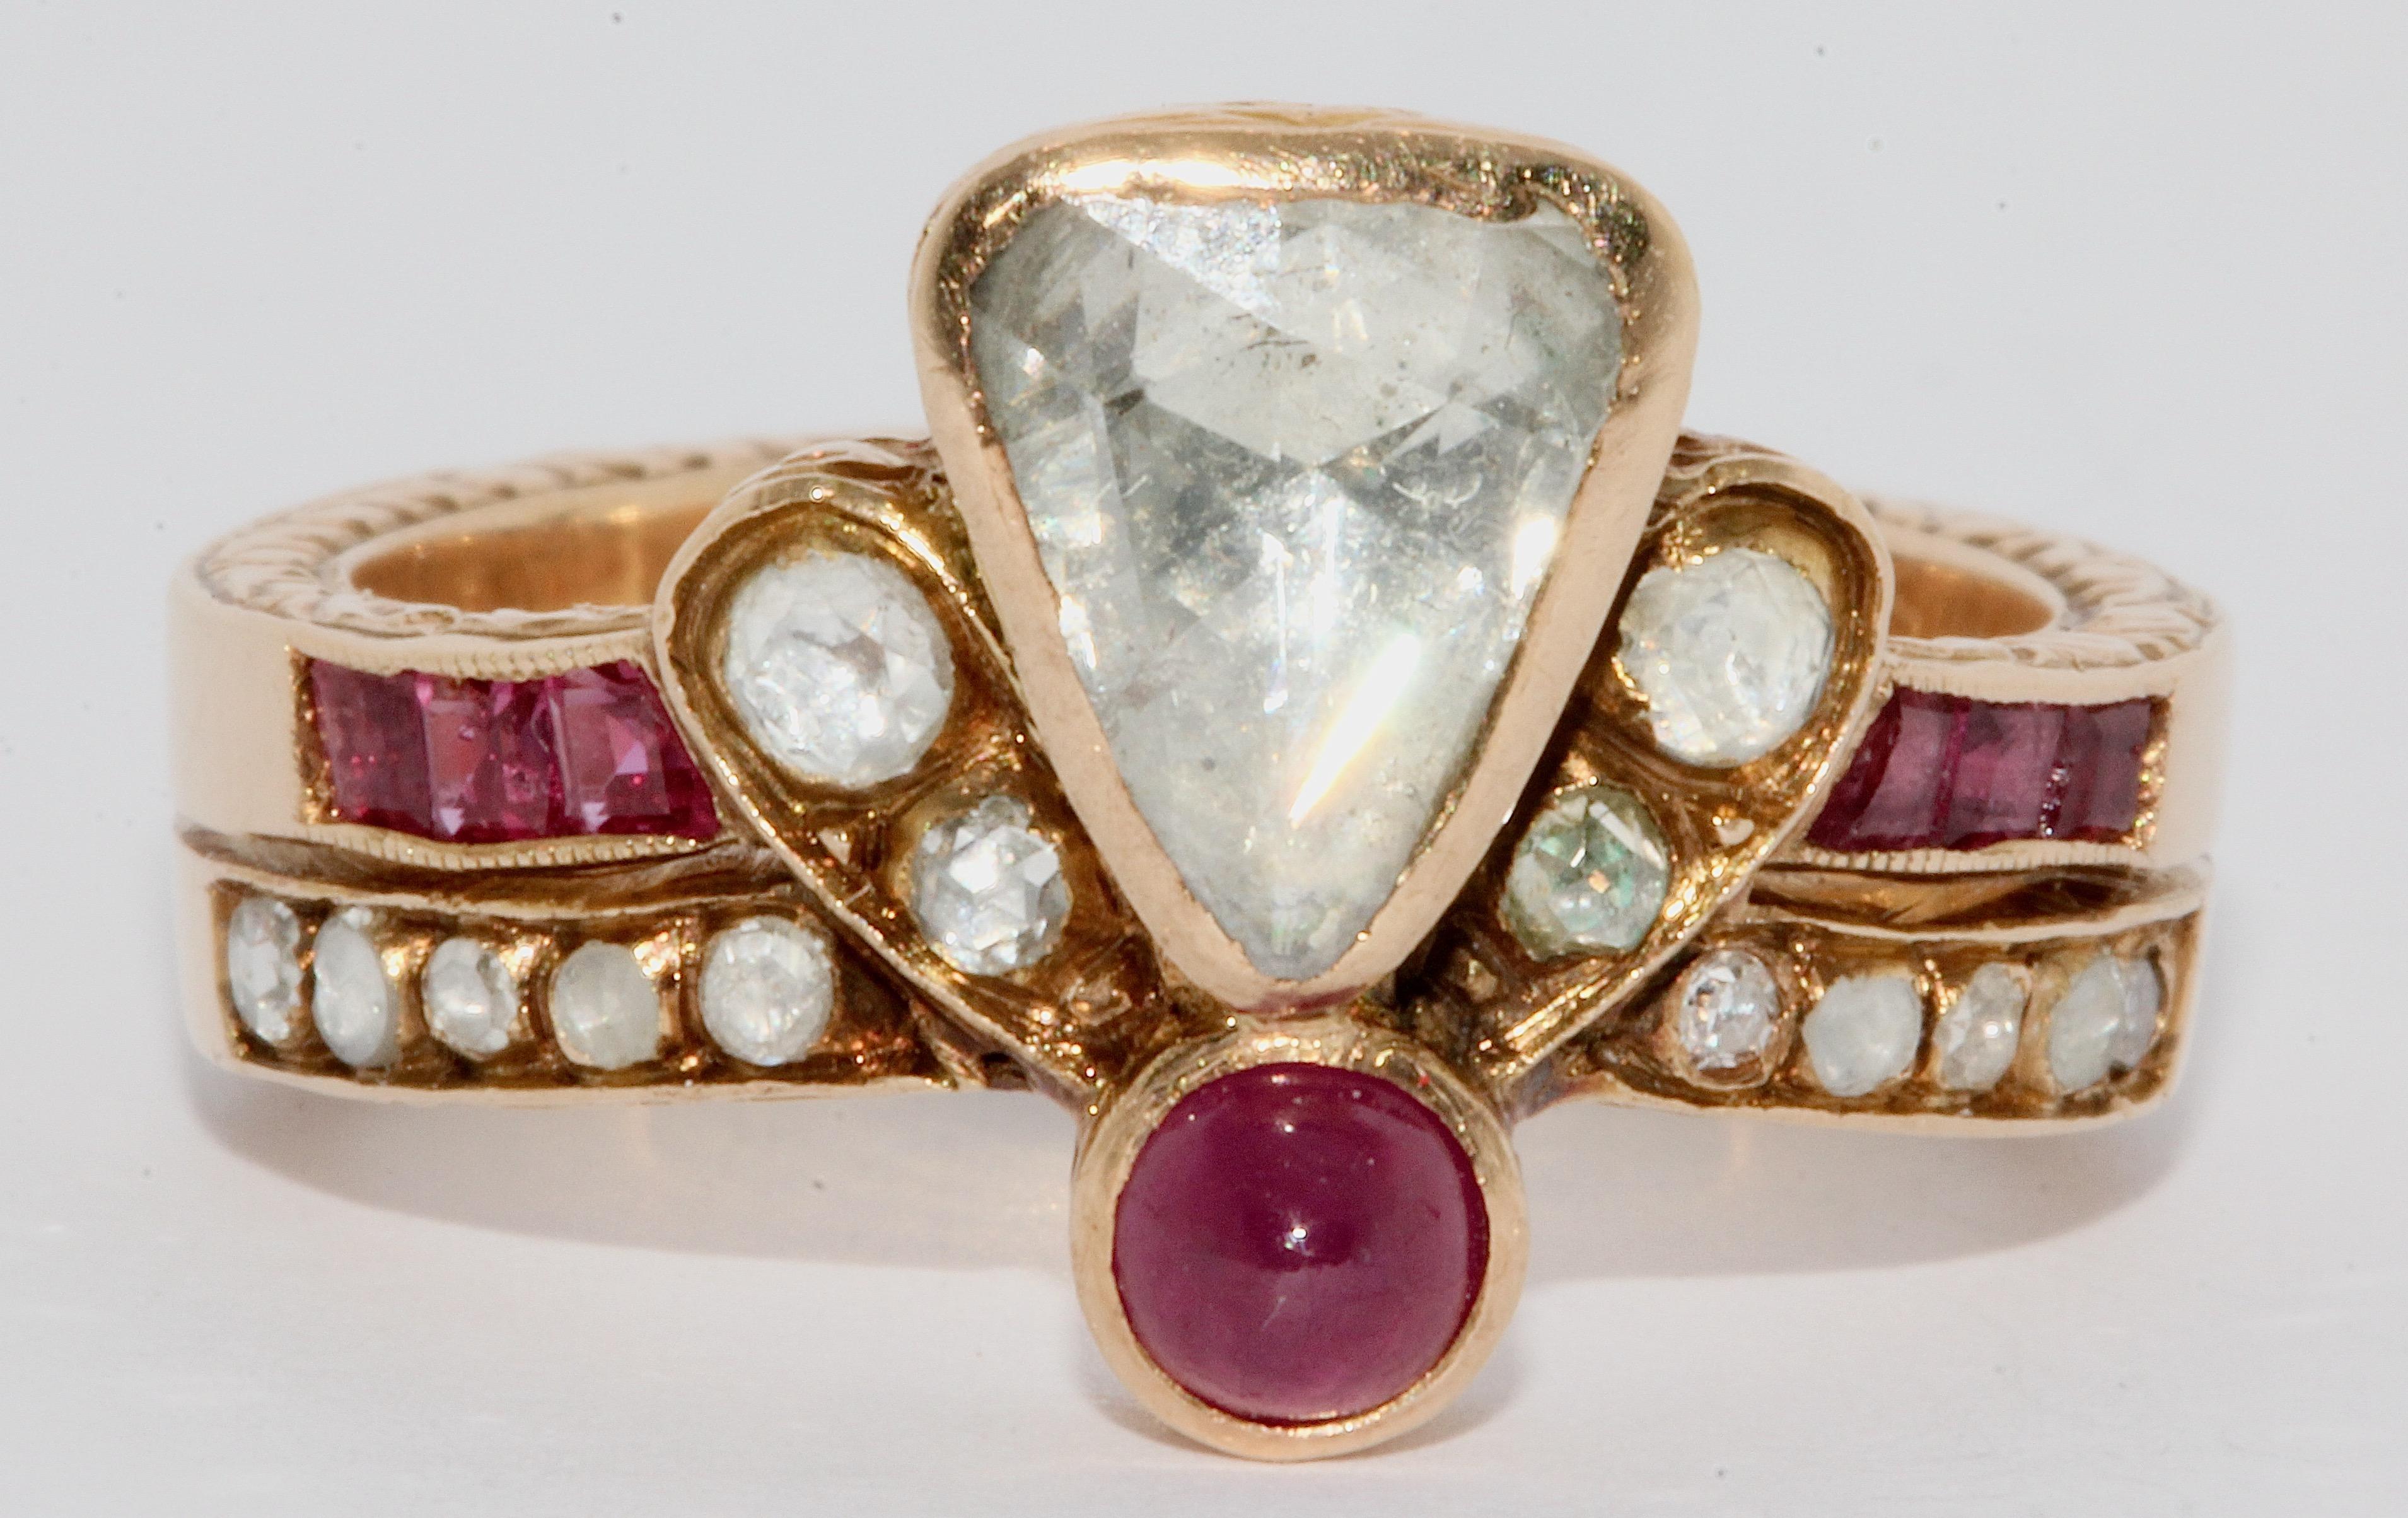 Magnificent, antique, royal gold ring with rose cut diamond, rubies and ornaments.

Ring set with a large rose-cut diamond of approximately 2 carat, additional diamonds and rubies.

The front and back of the ring setting is intricately